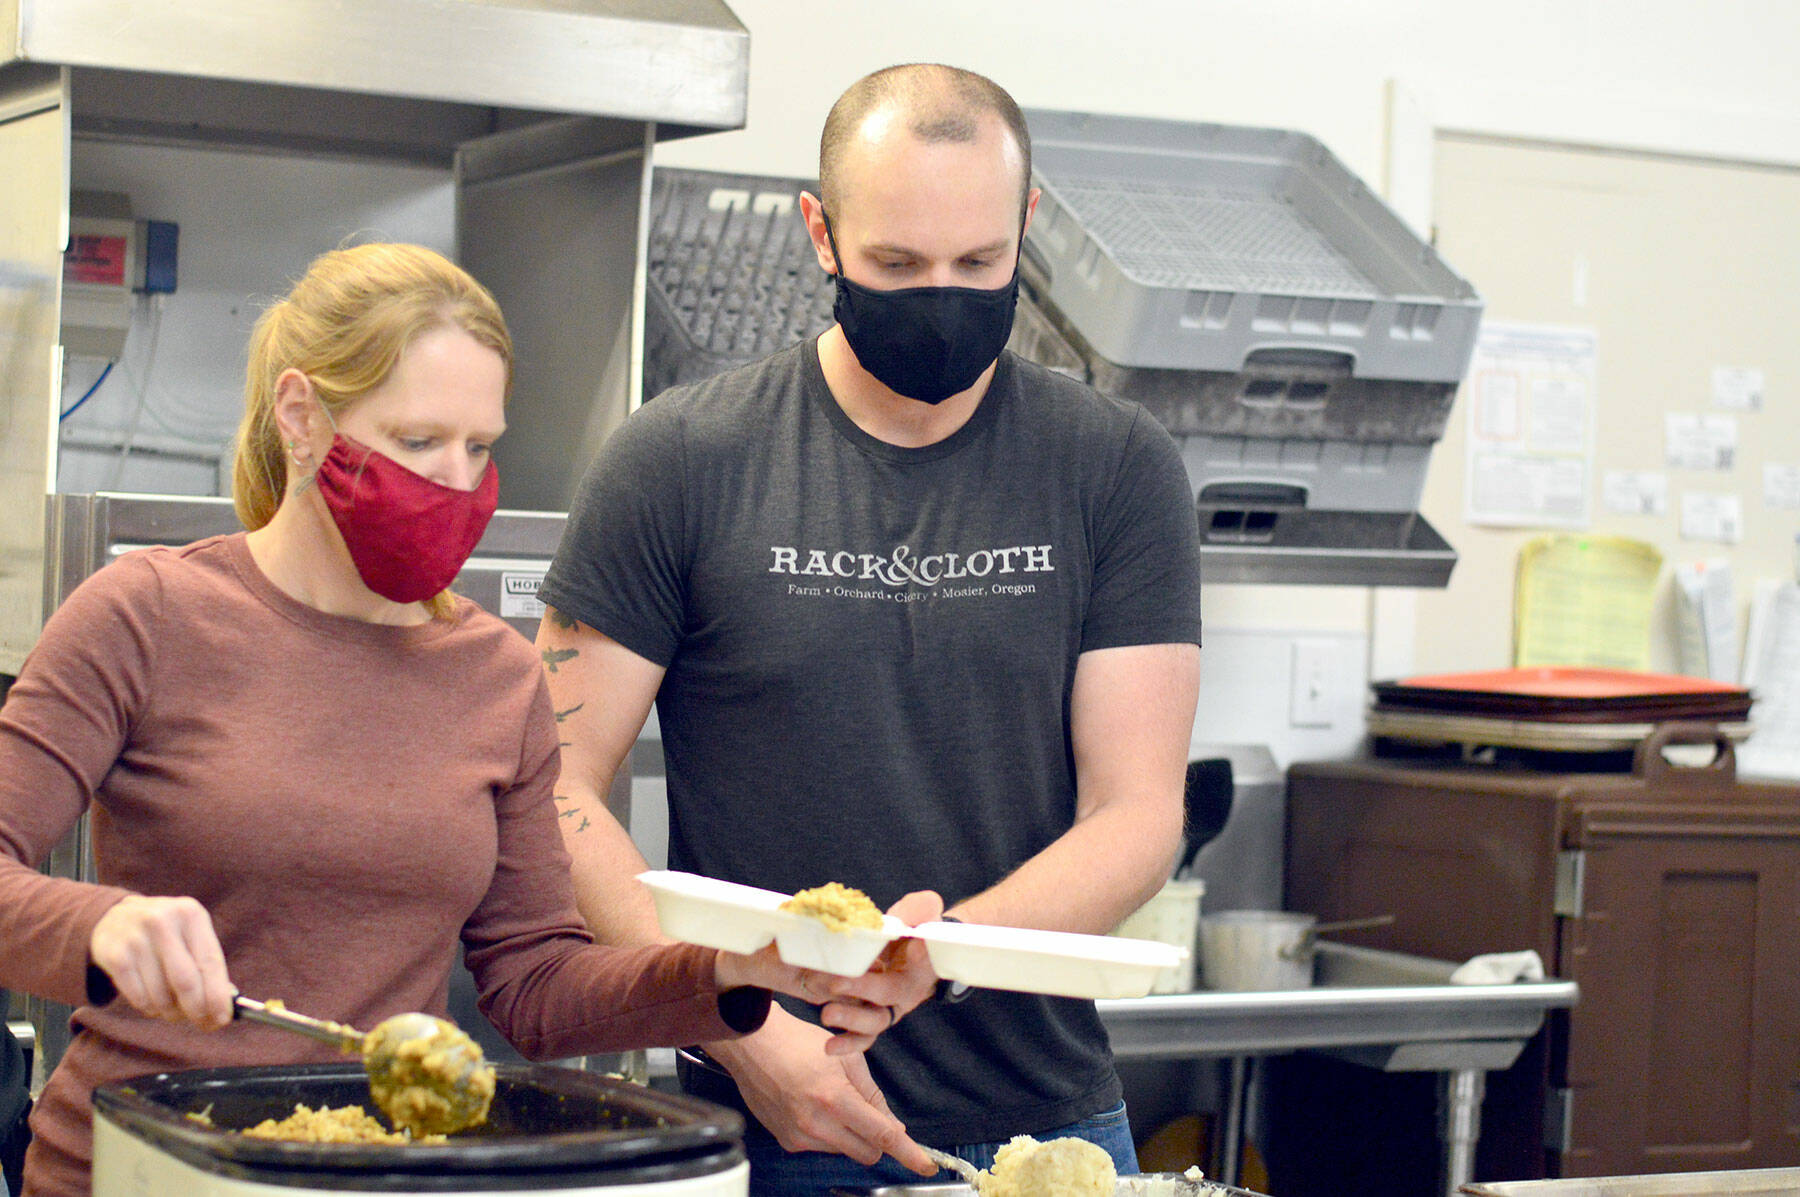 Volunteer Laura Street and her husband Matt Patterson of Gardiner were on the kitchen crew Thursday as the Tri-Area Community Center served hundreds of takeout meals. (Diane Urbani de la Paz/Peninsula Daily News)